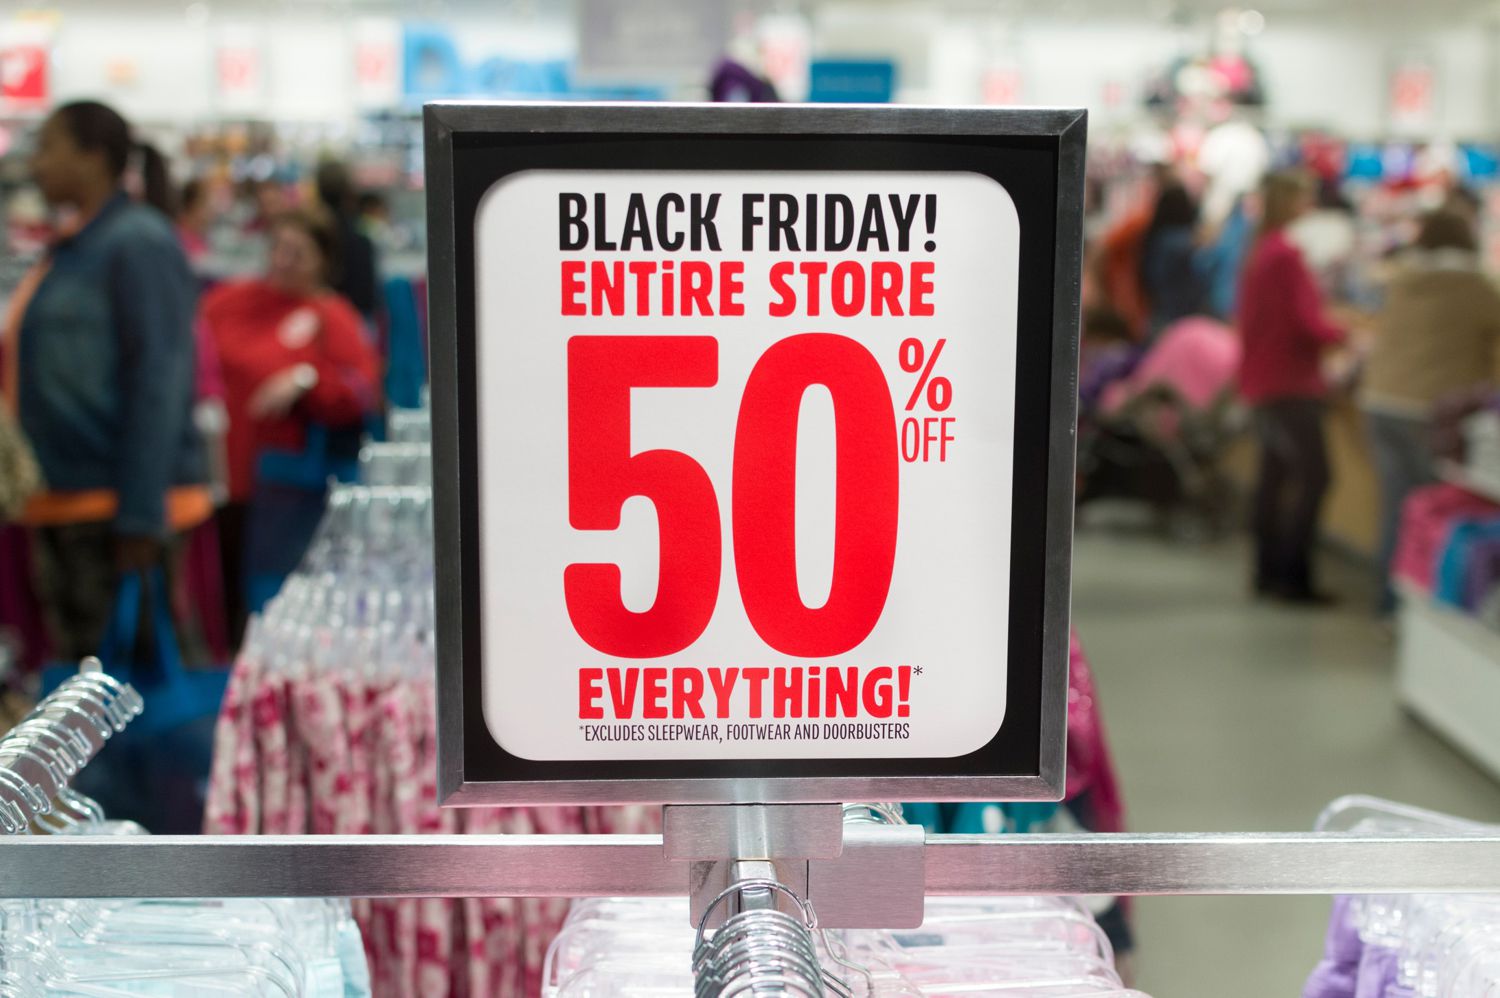 10 Tips to Get the Most Out of Black Friday Deals - Is There A Black Friday Deal